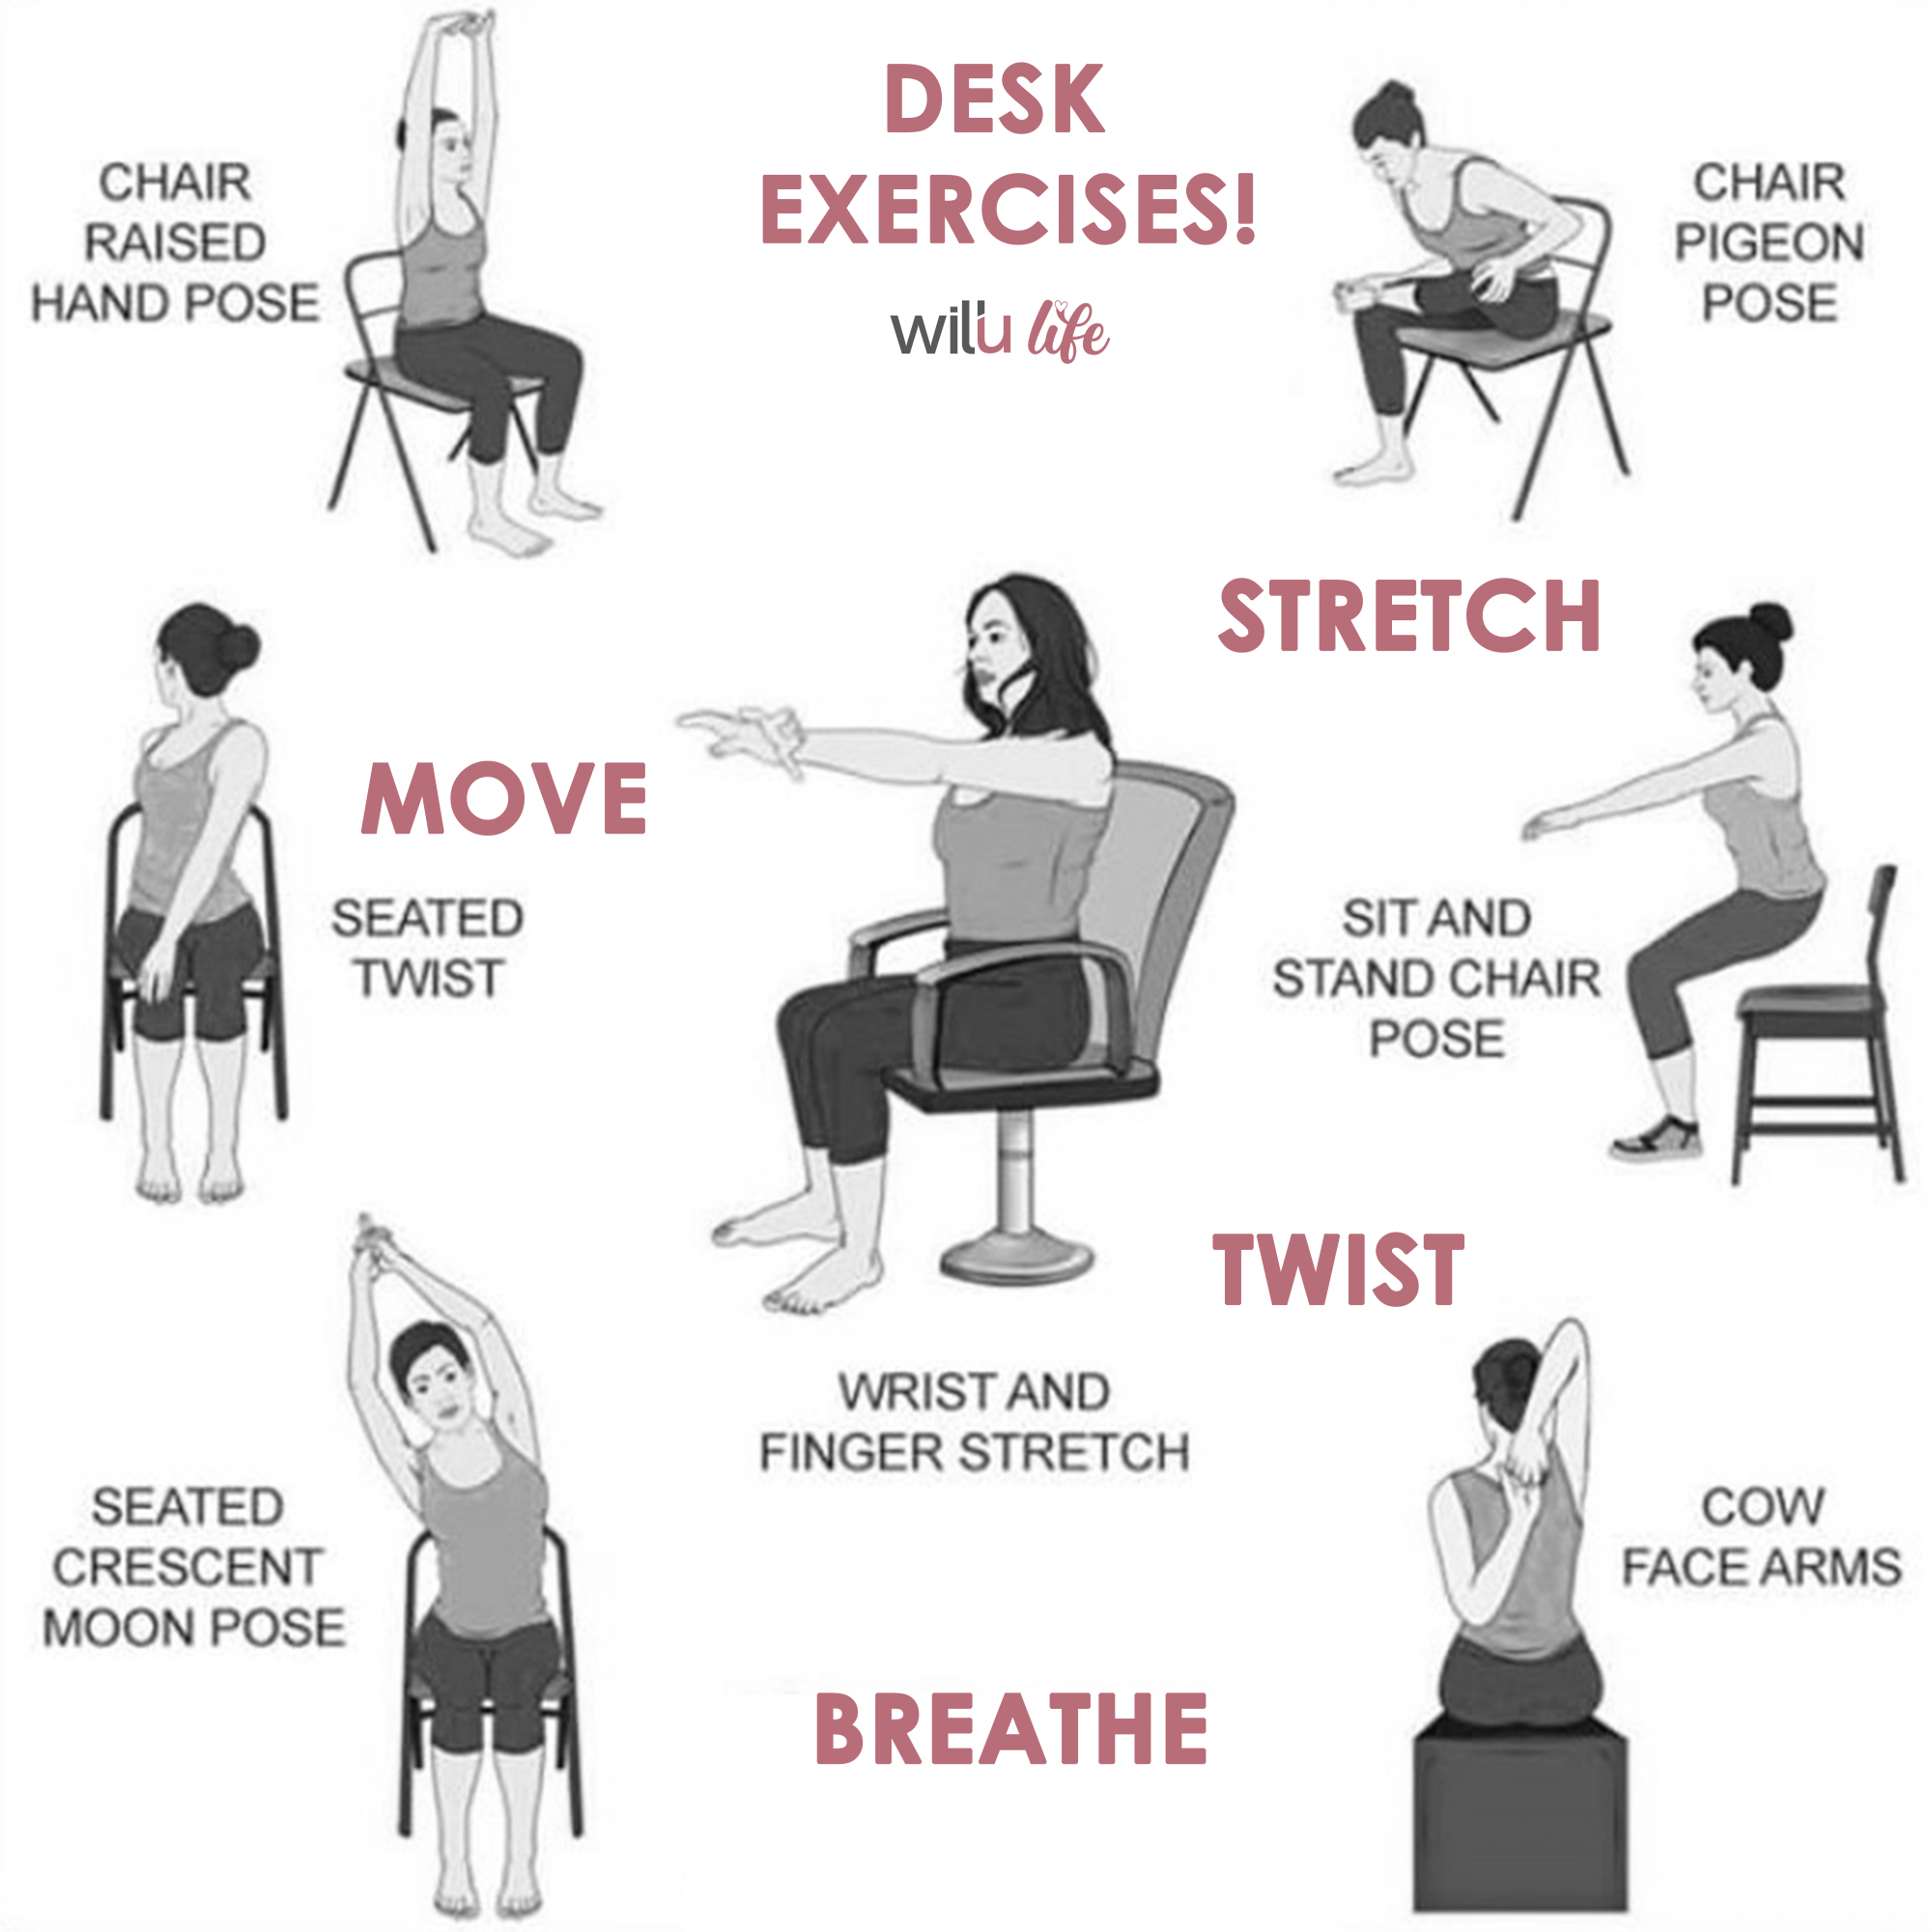 10 Essential Desk Exercises To Make You Feel Good At Work